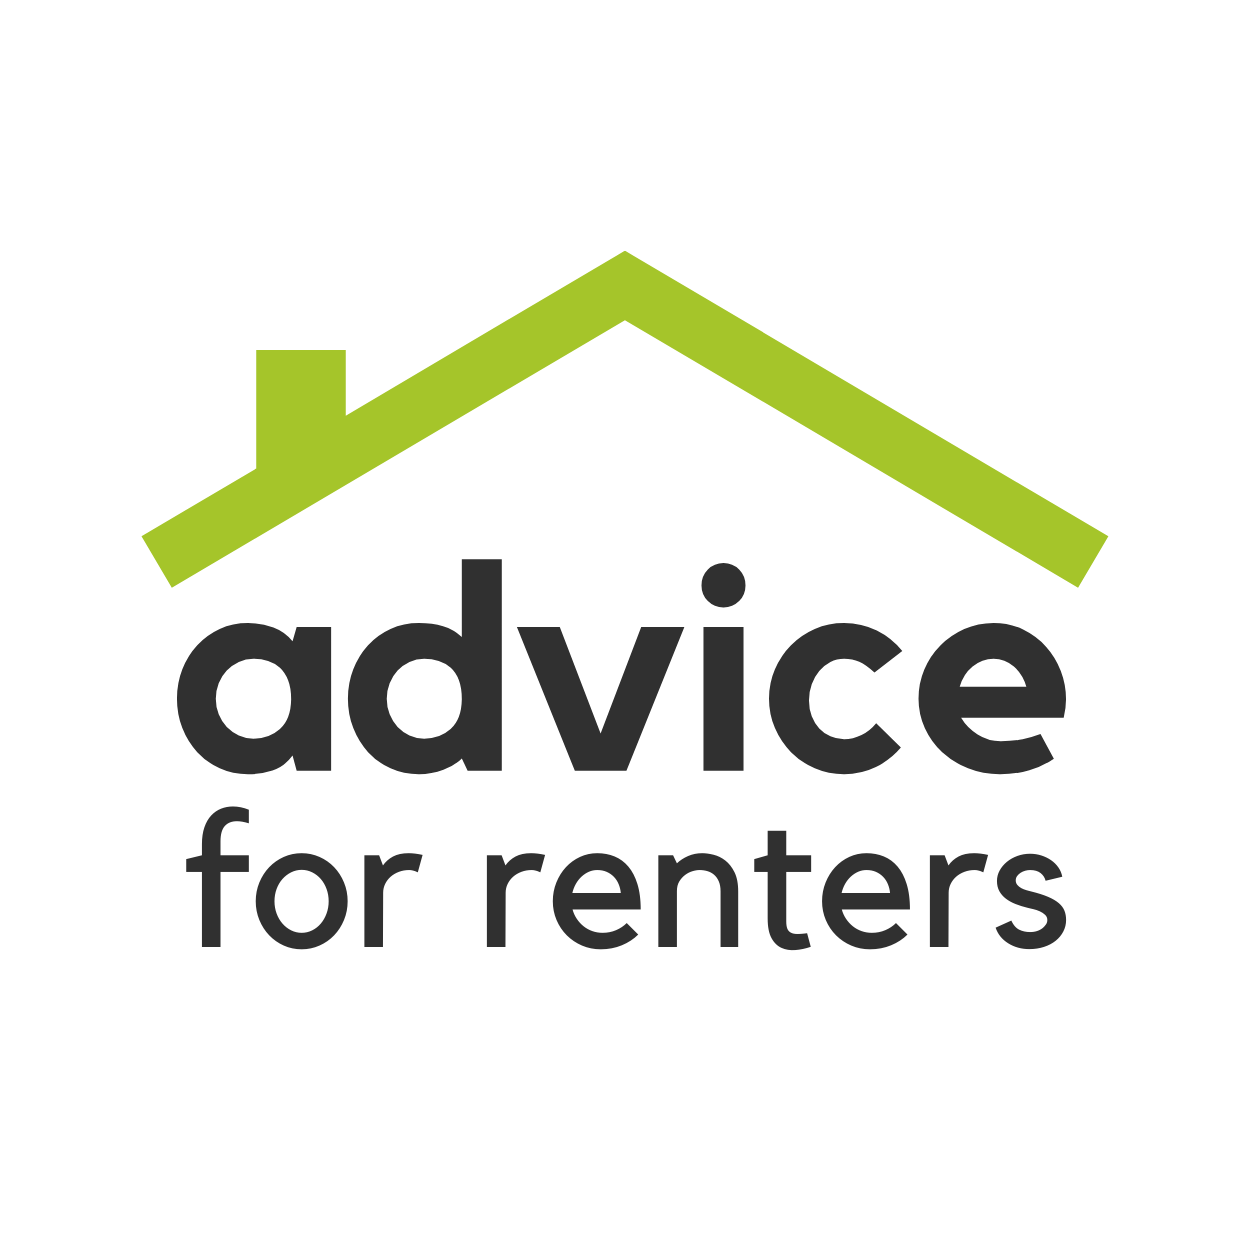 Advice For Renters